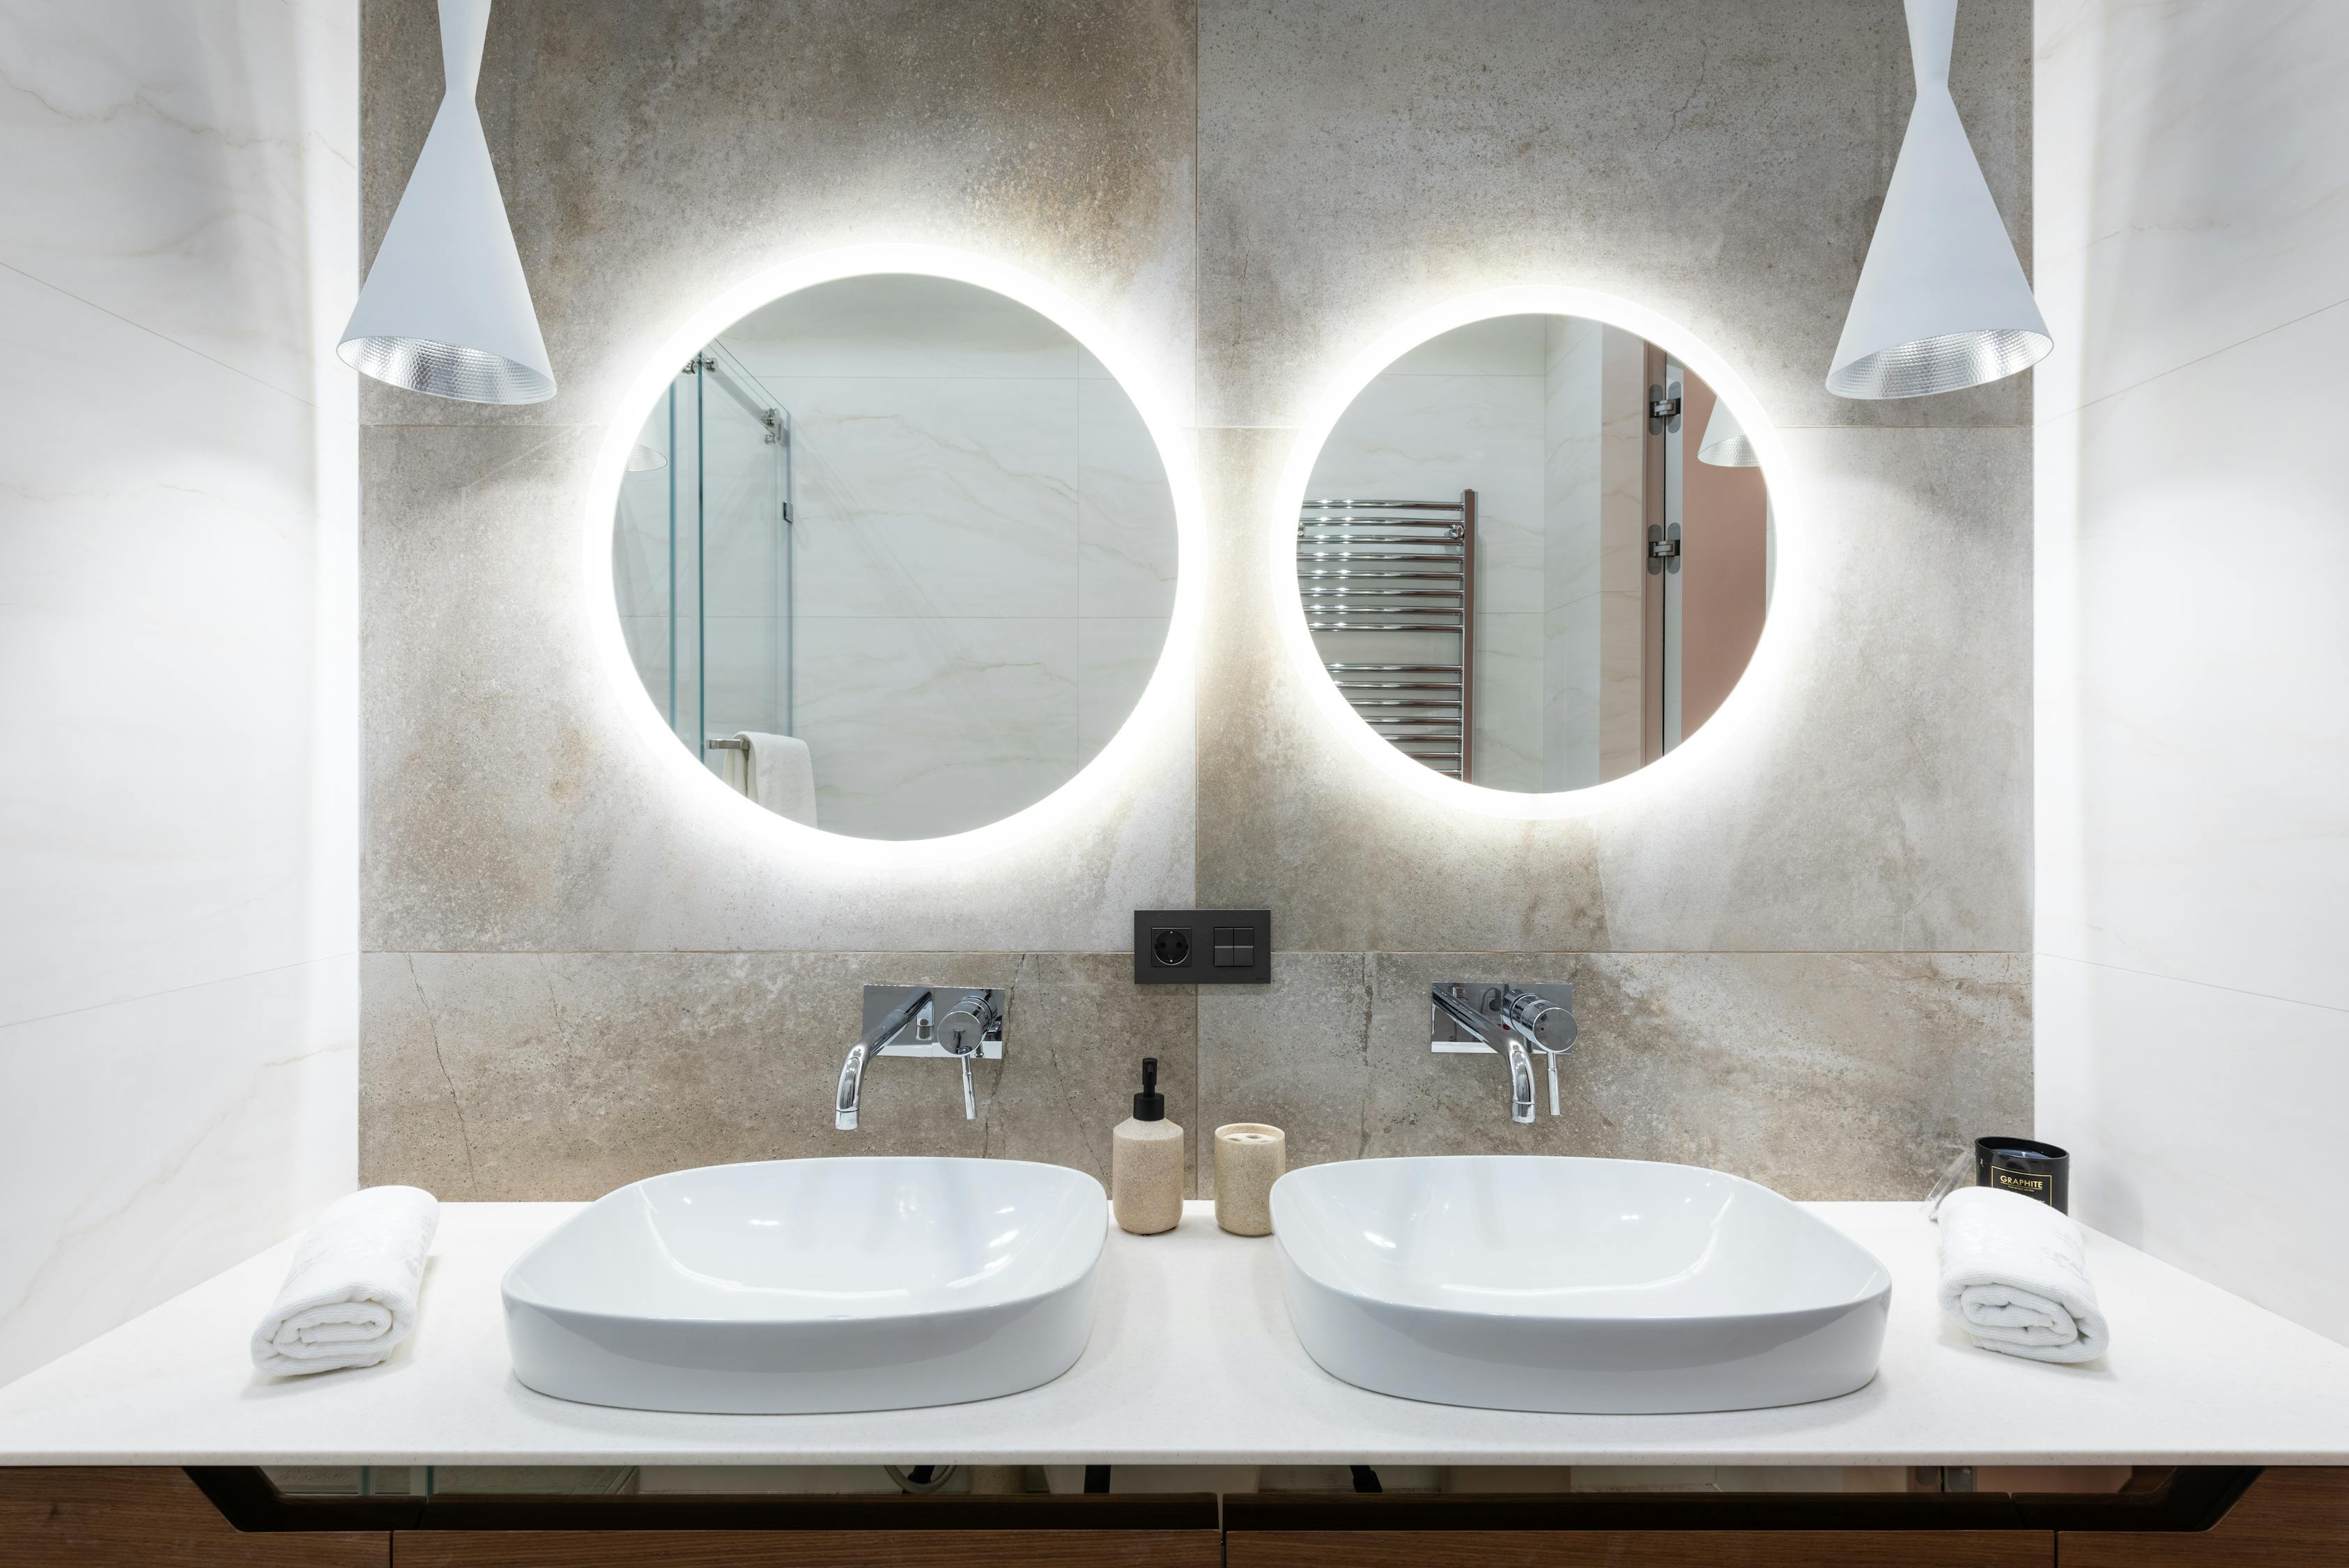 Task Lighting with LED Strips in Bathroom